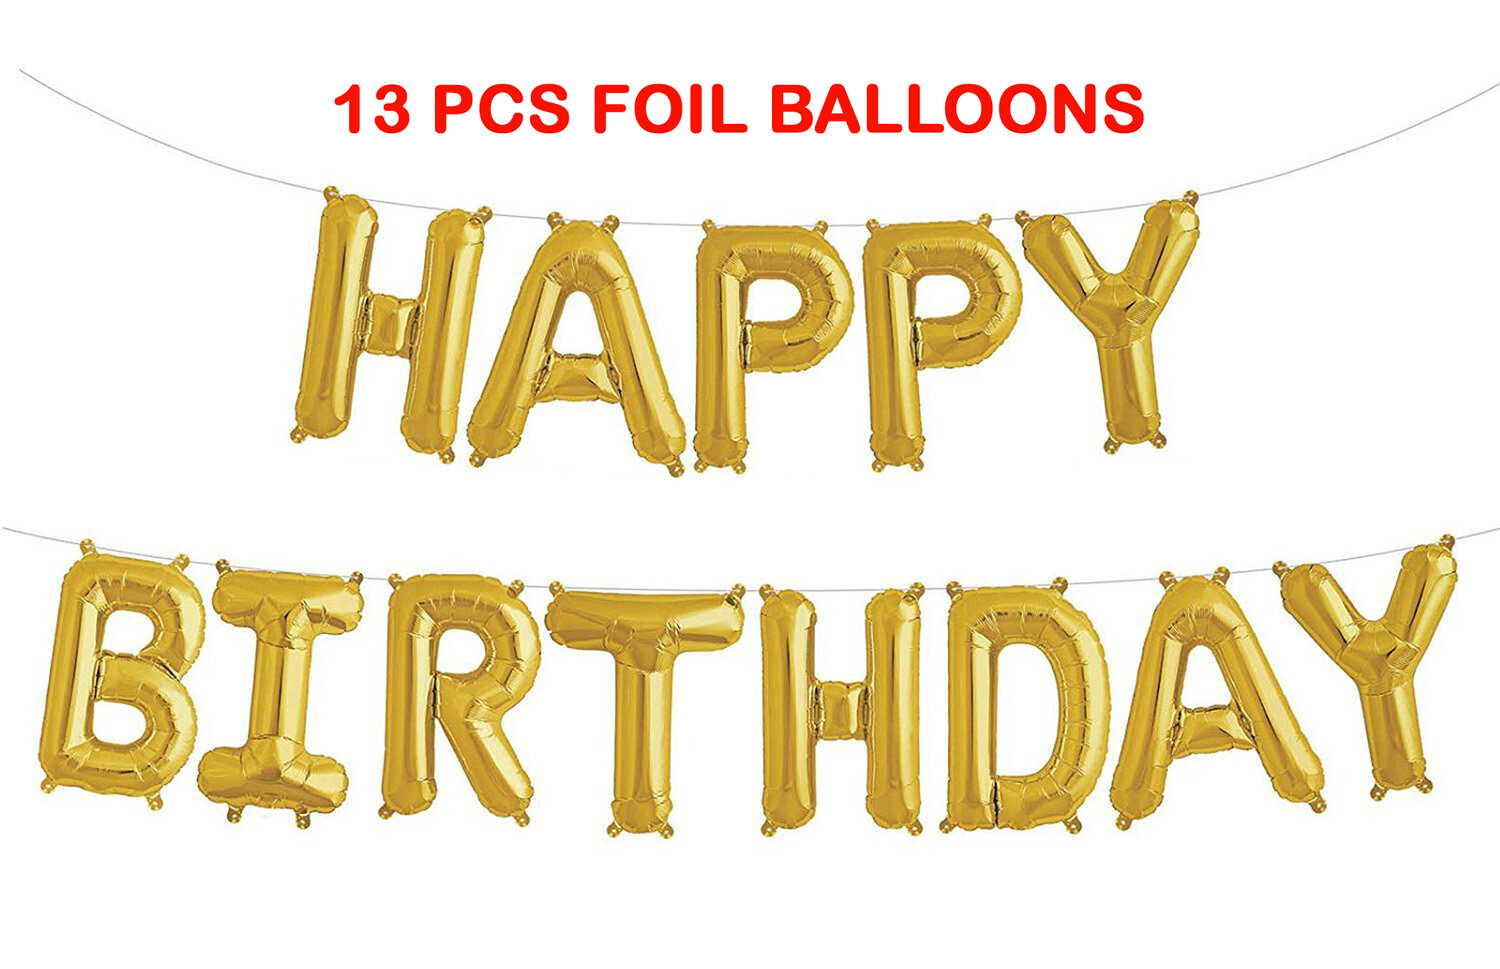 Happy Birthday Foil Balloons - Gold (13 Letters)